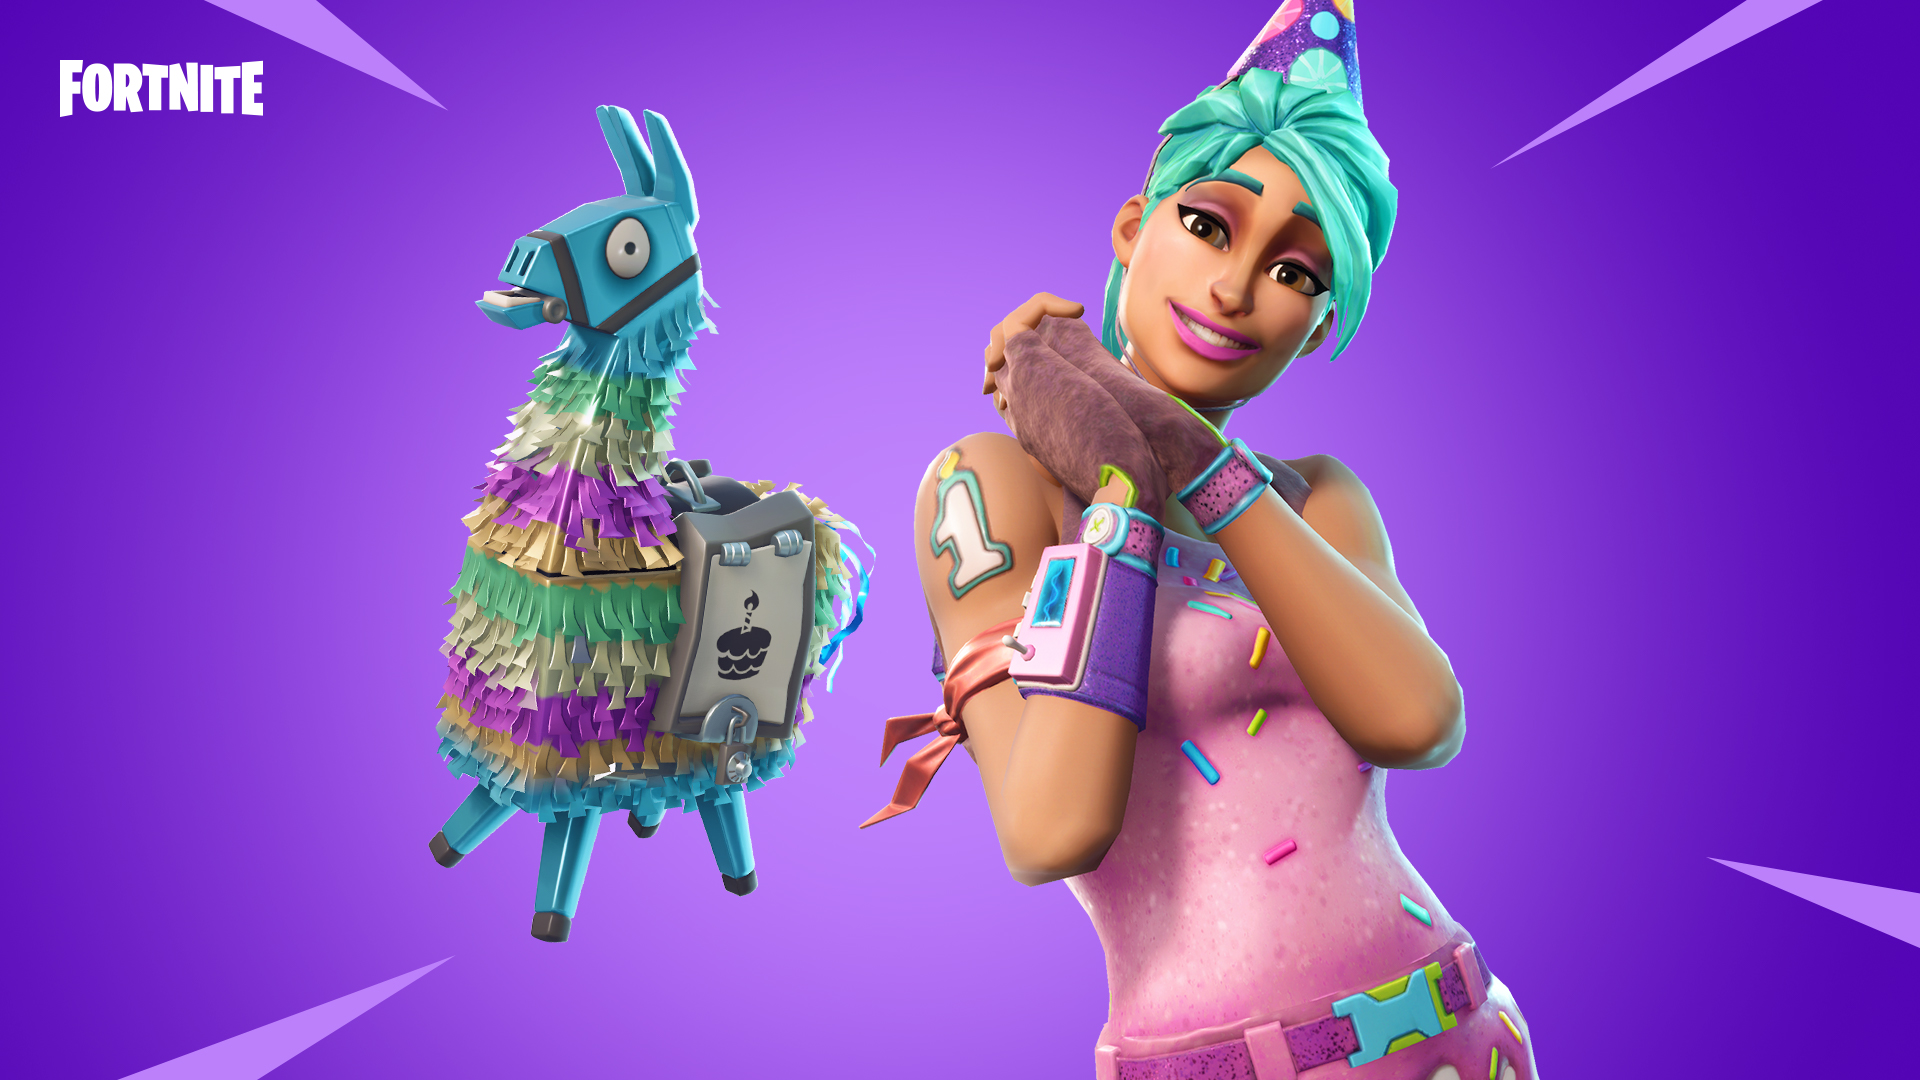 Fortnite' Celebrates First Birthday With Update, New Challenges